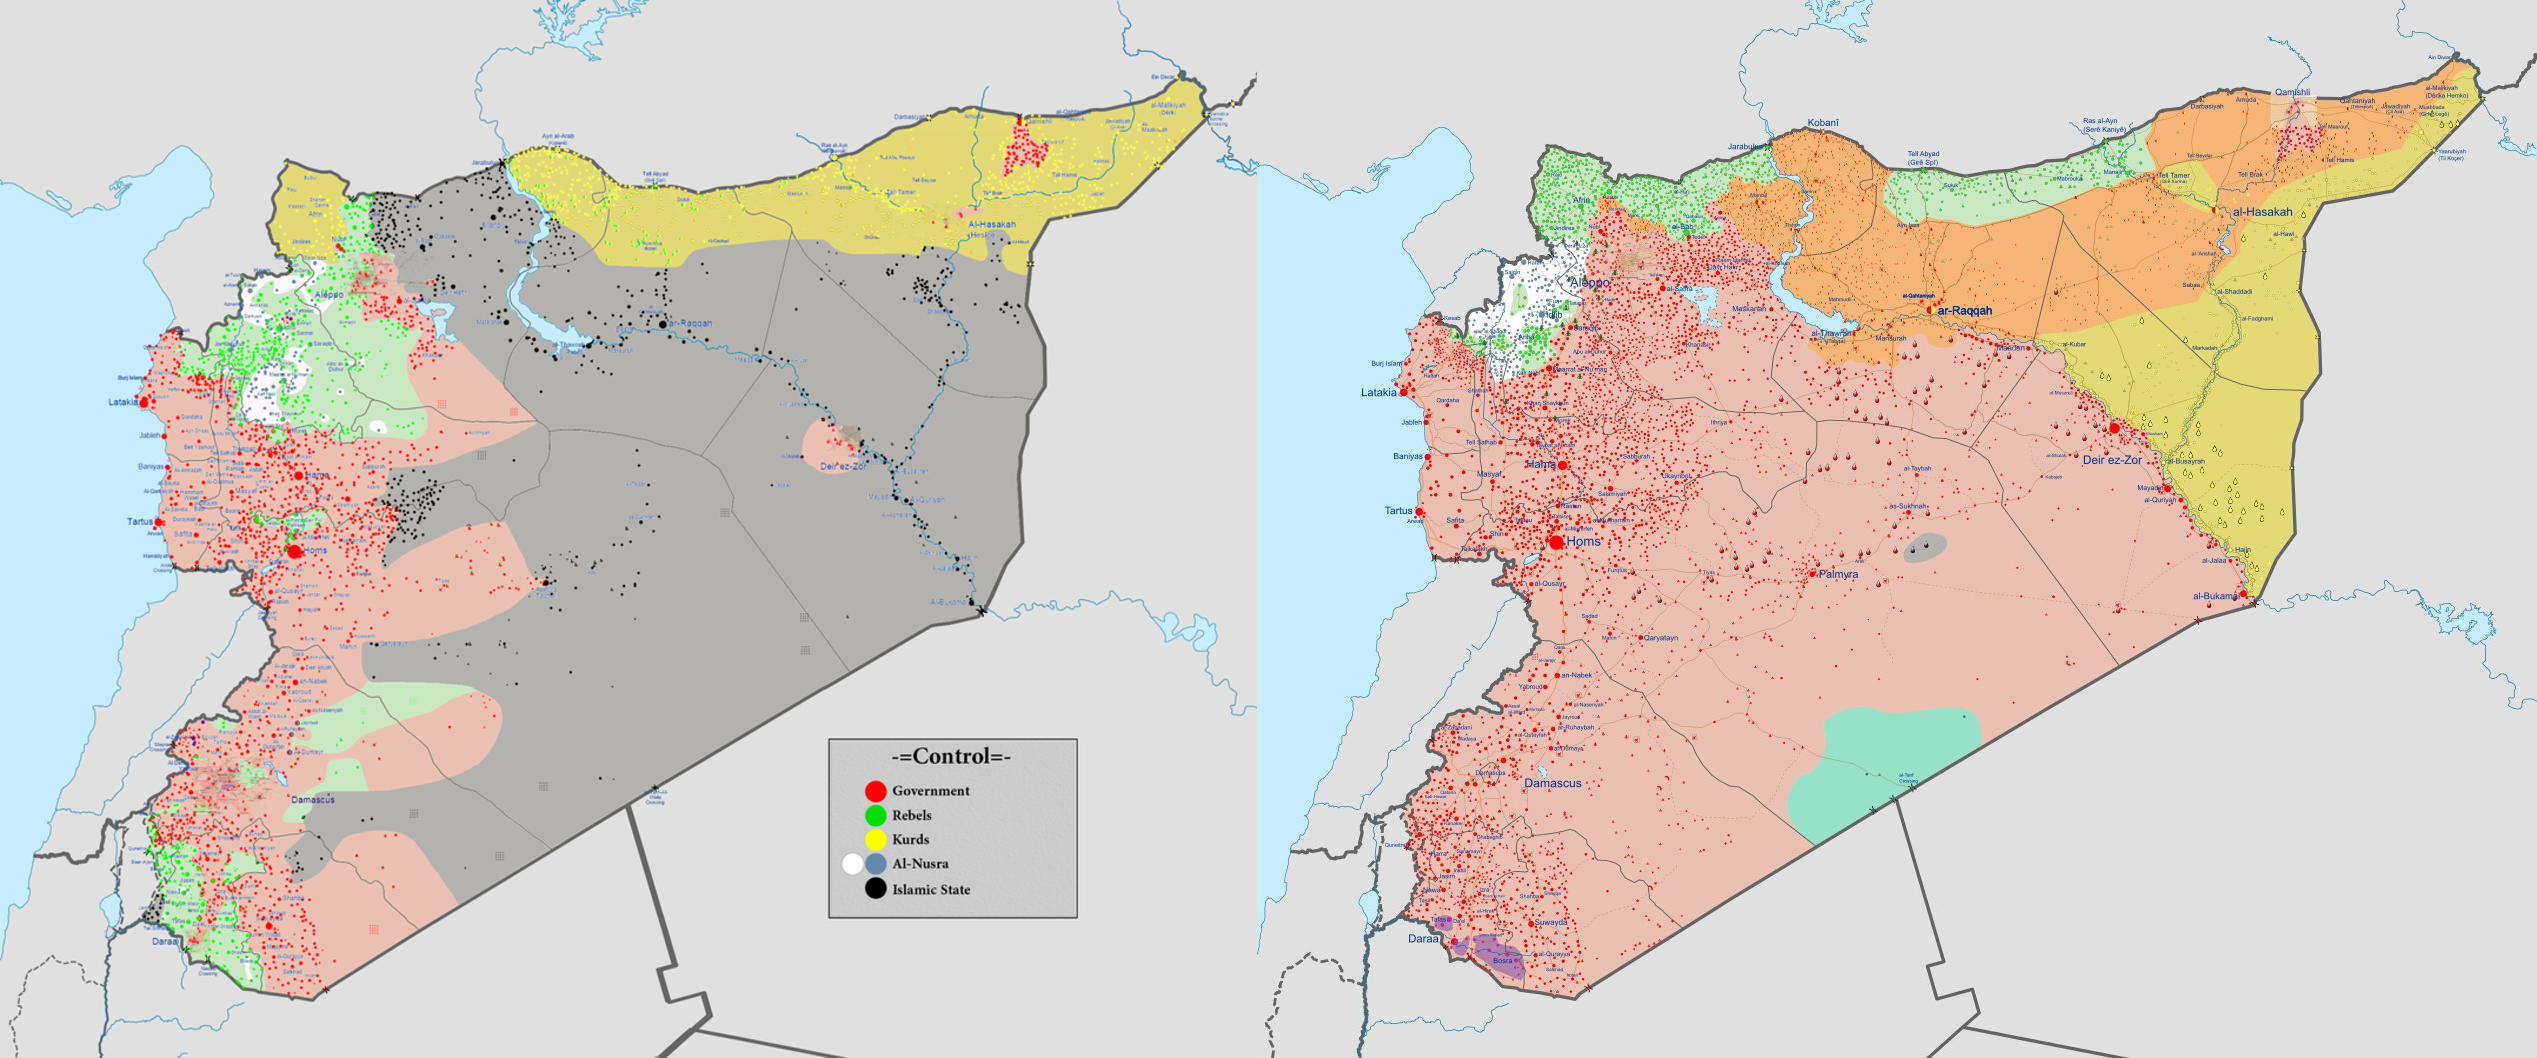 https://commons.wikimedia.org/wiki/File:Syrian_civil_war_07_10_2015.png